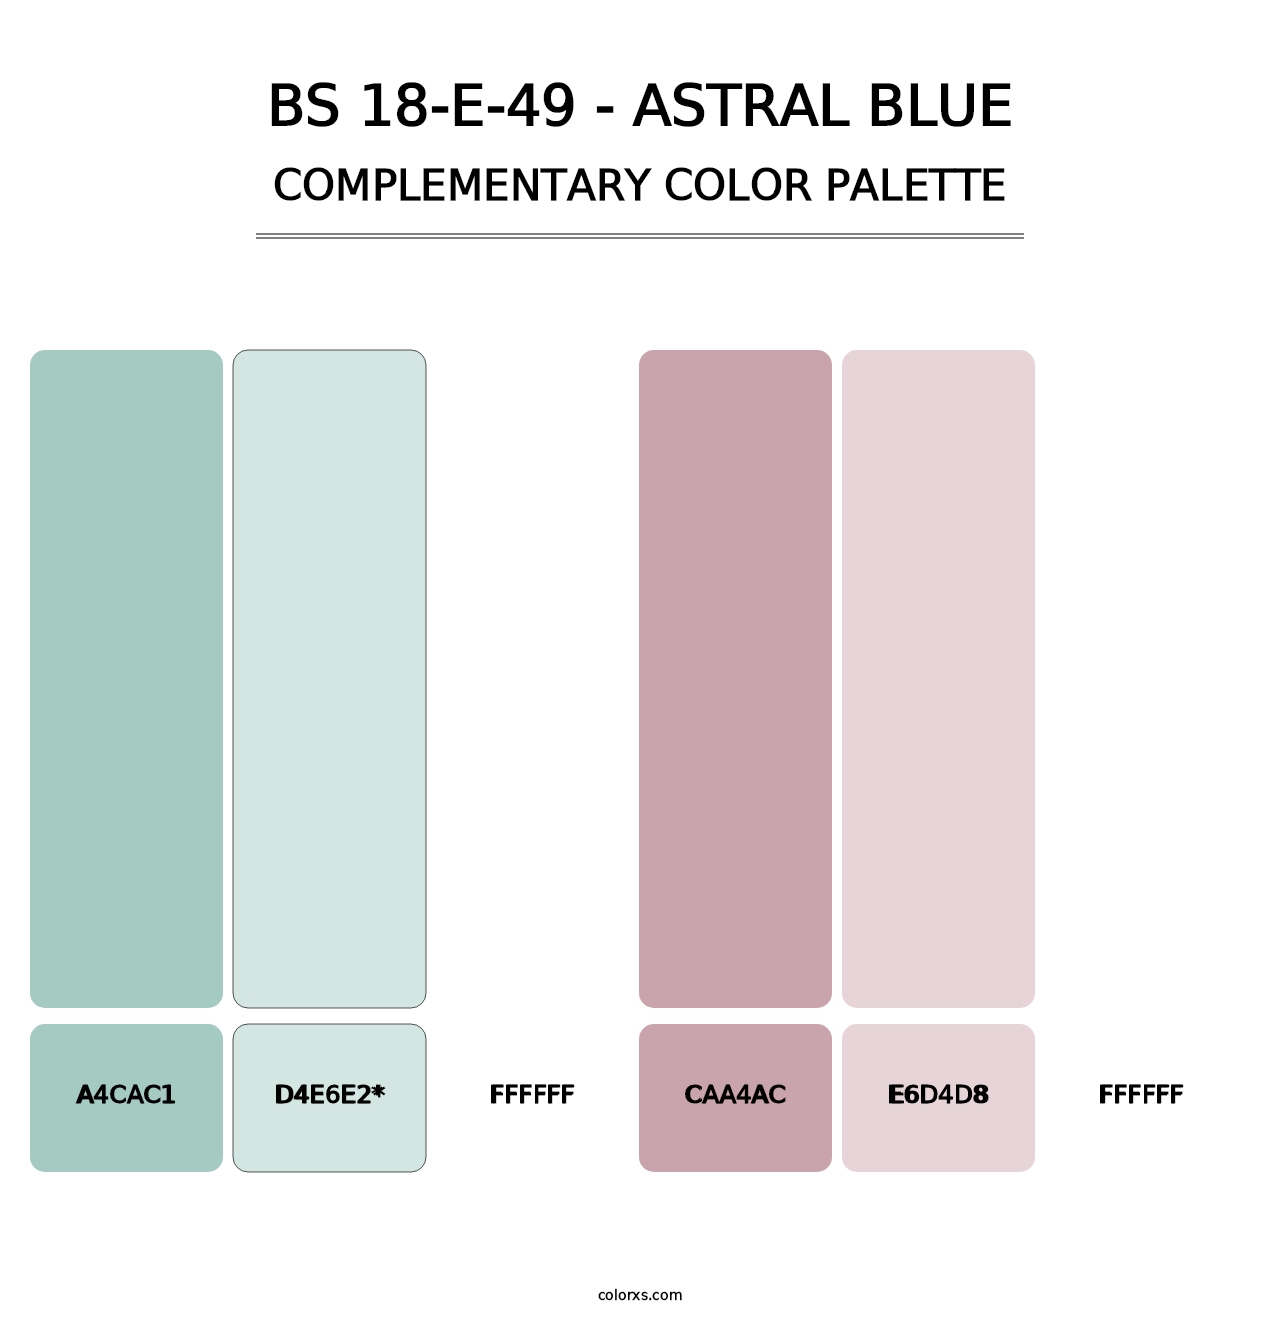 BS 18-E-49 - Astral Blue - Complementary Color Palette